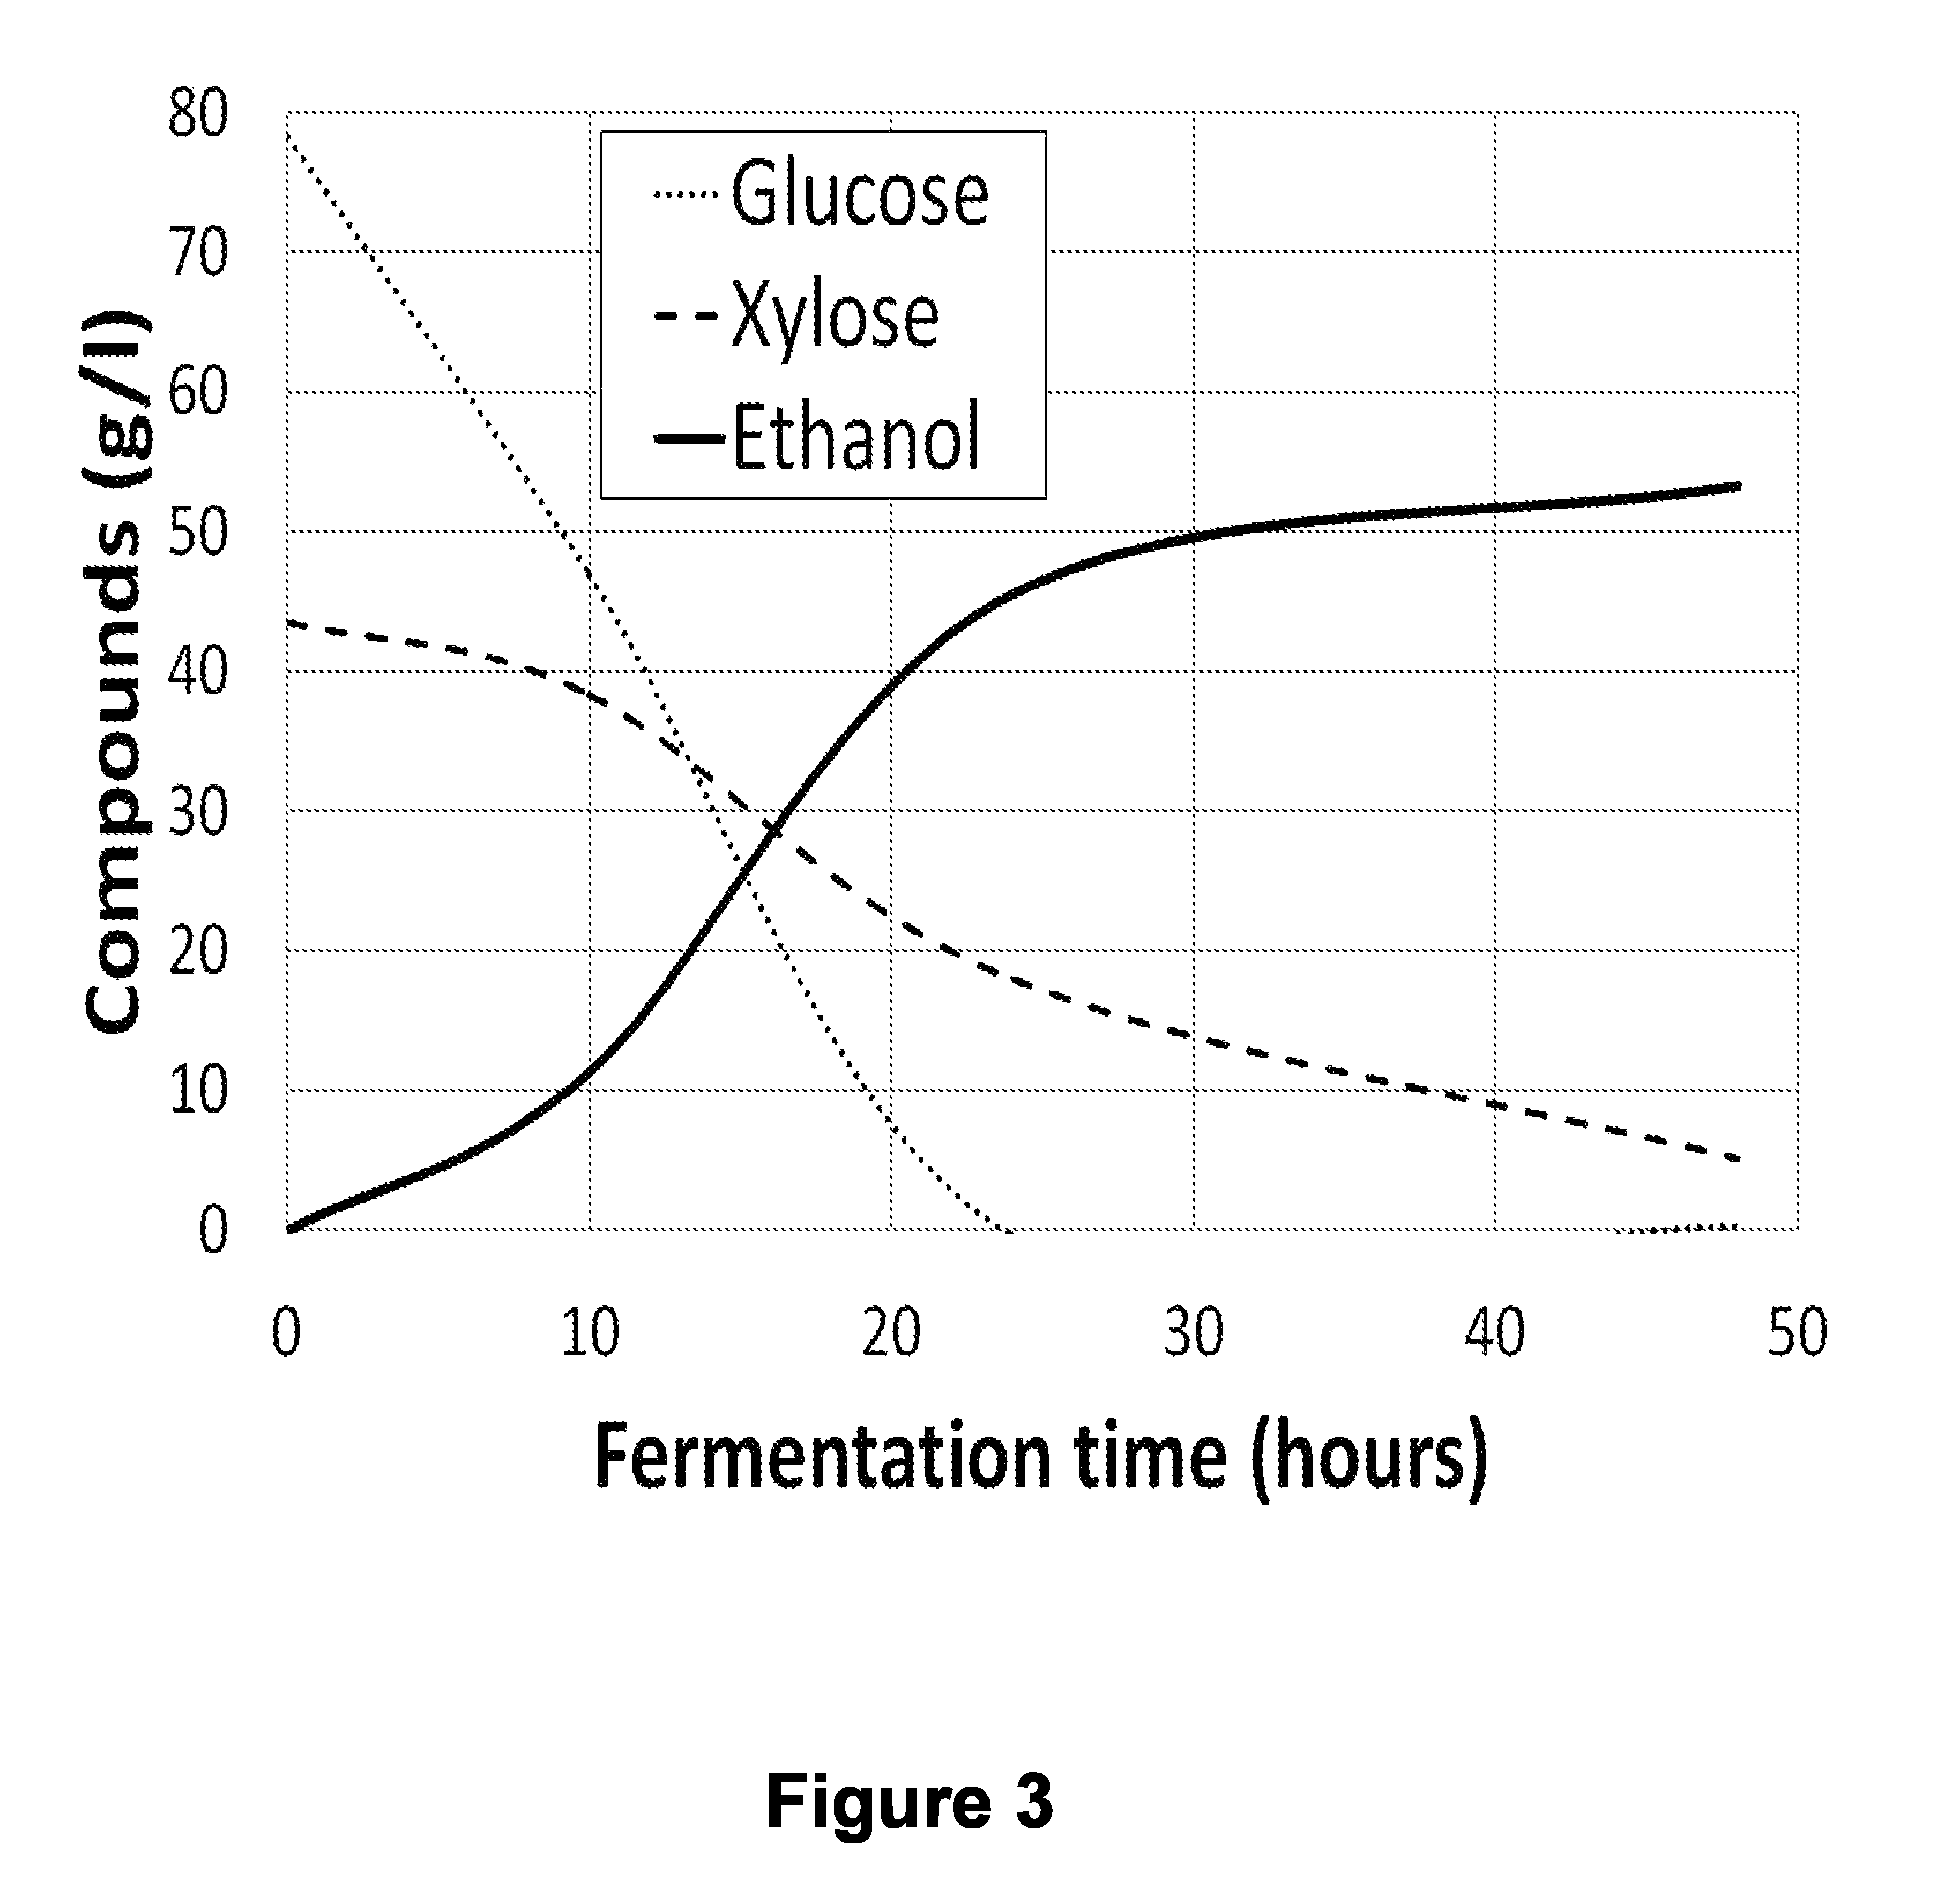 Continuous process for the production of ethanol from lignocellulosic biomass